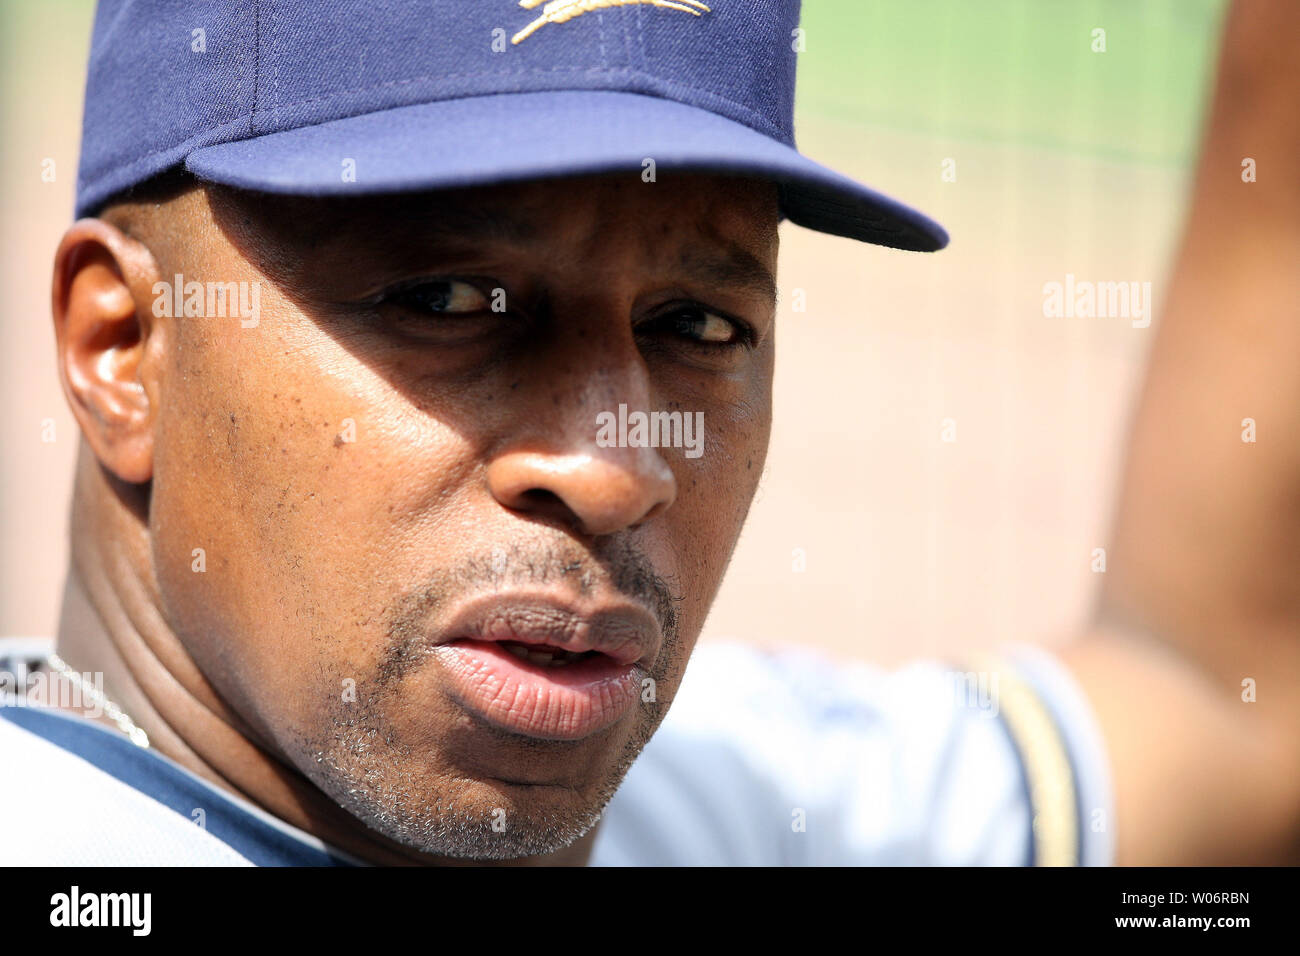 Milwaukee Brewers bench coach Willy Randolph looks to the stands during a game against the St. Louis Cardinals at Busch Stadium in St. Louis on June 5, 2010. UPI/Bill Greenblatt Stock Photo